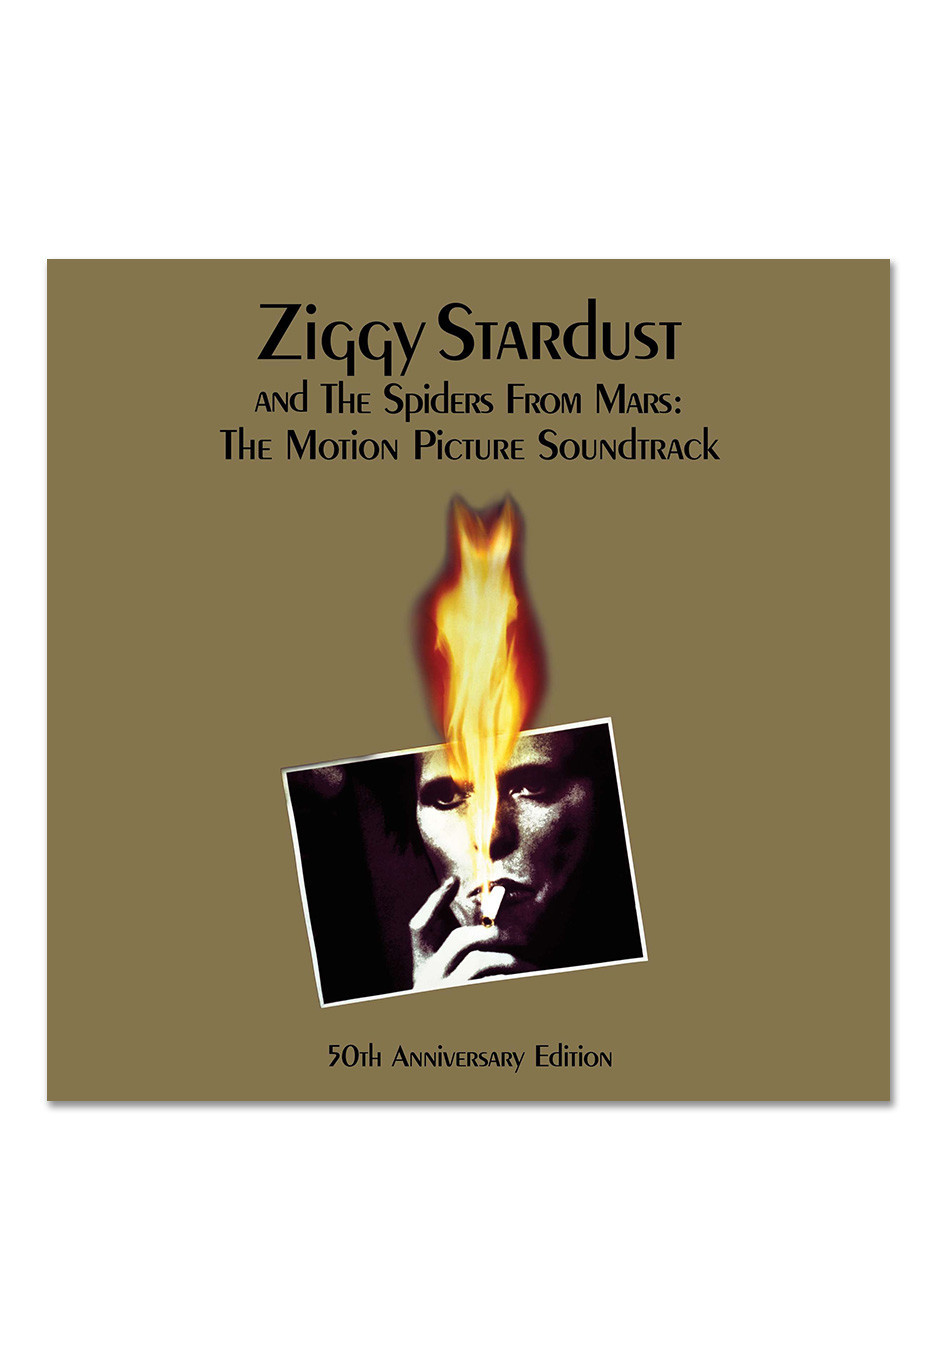 David Bowie - Ziggy Stardust And The Spiders From Mars (50th Anniversary Edition) - CD